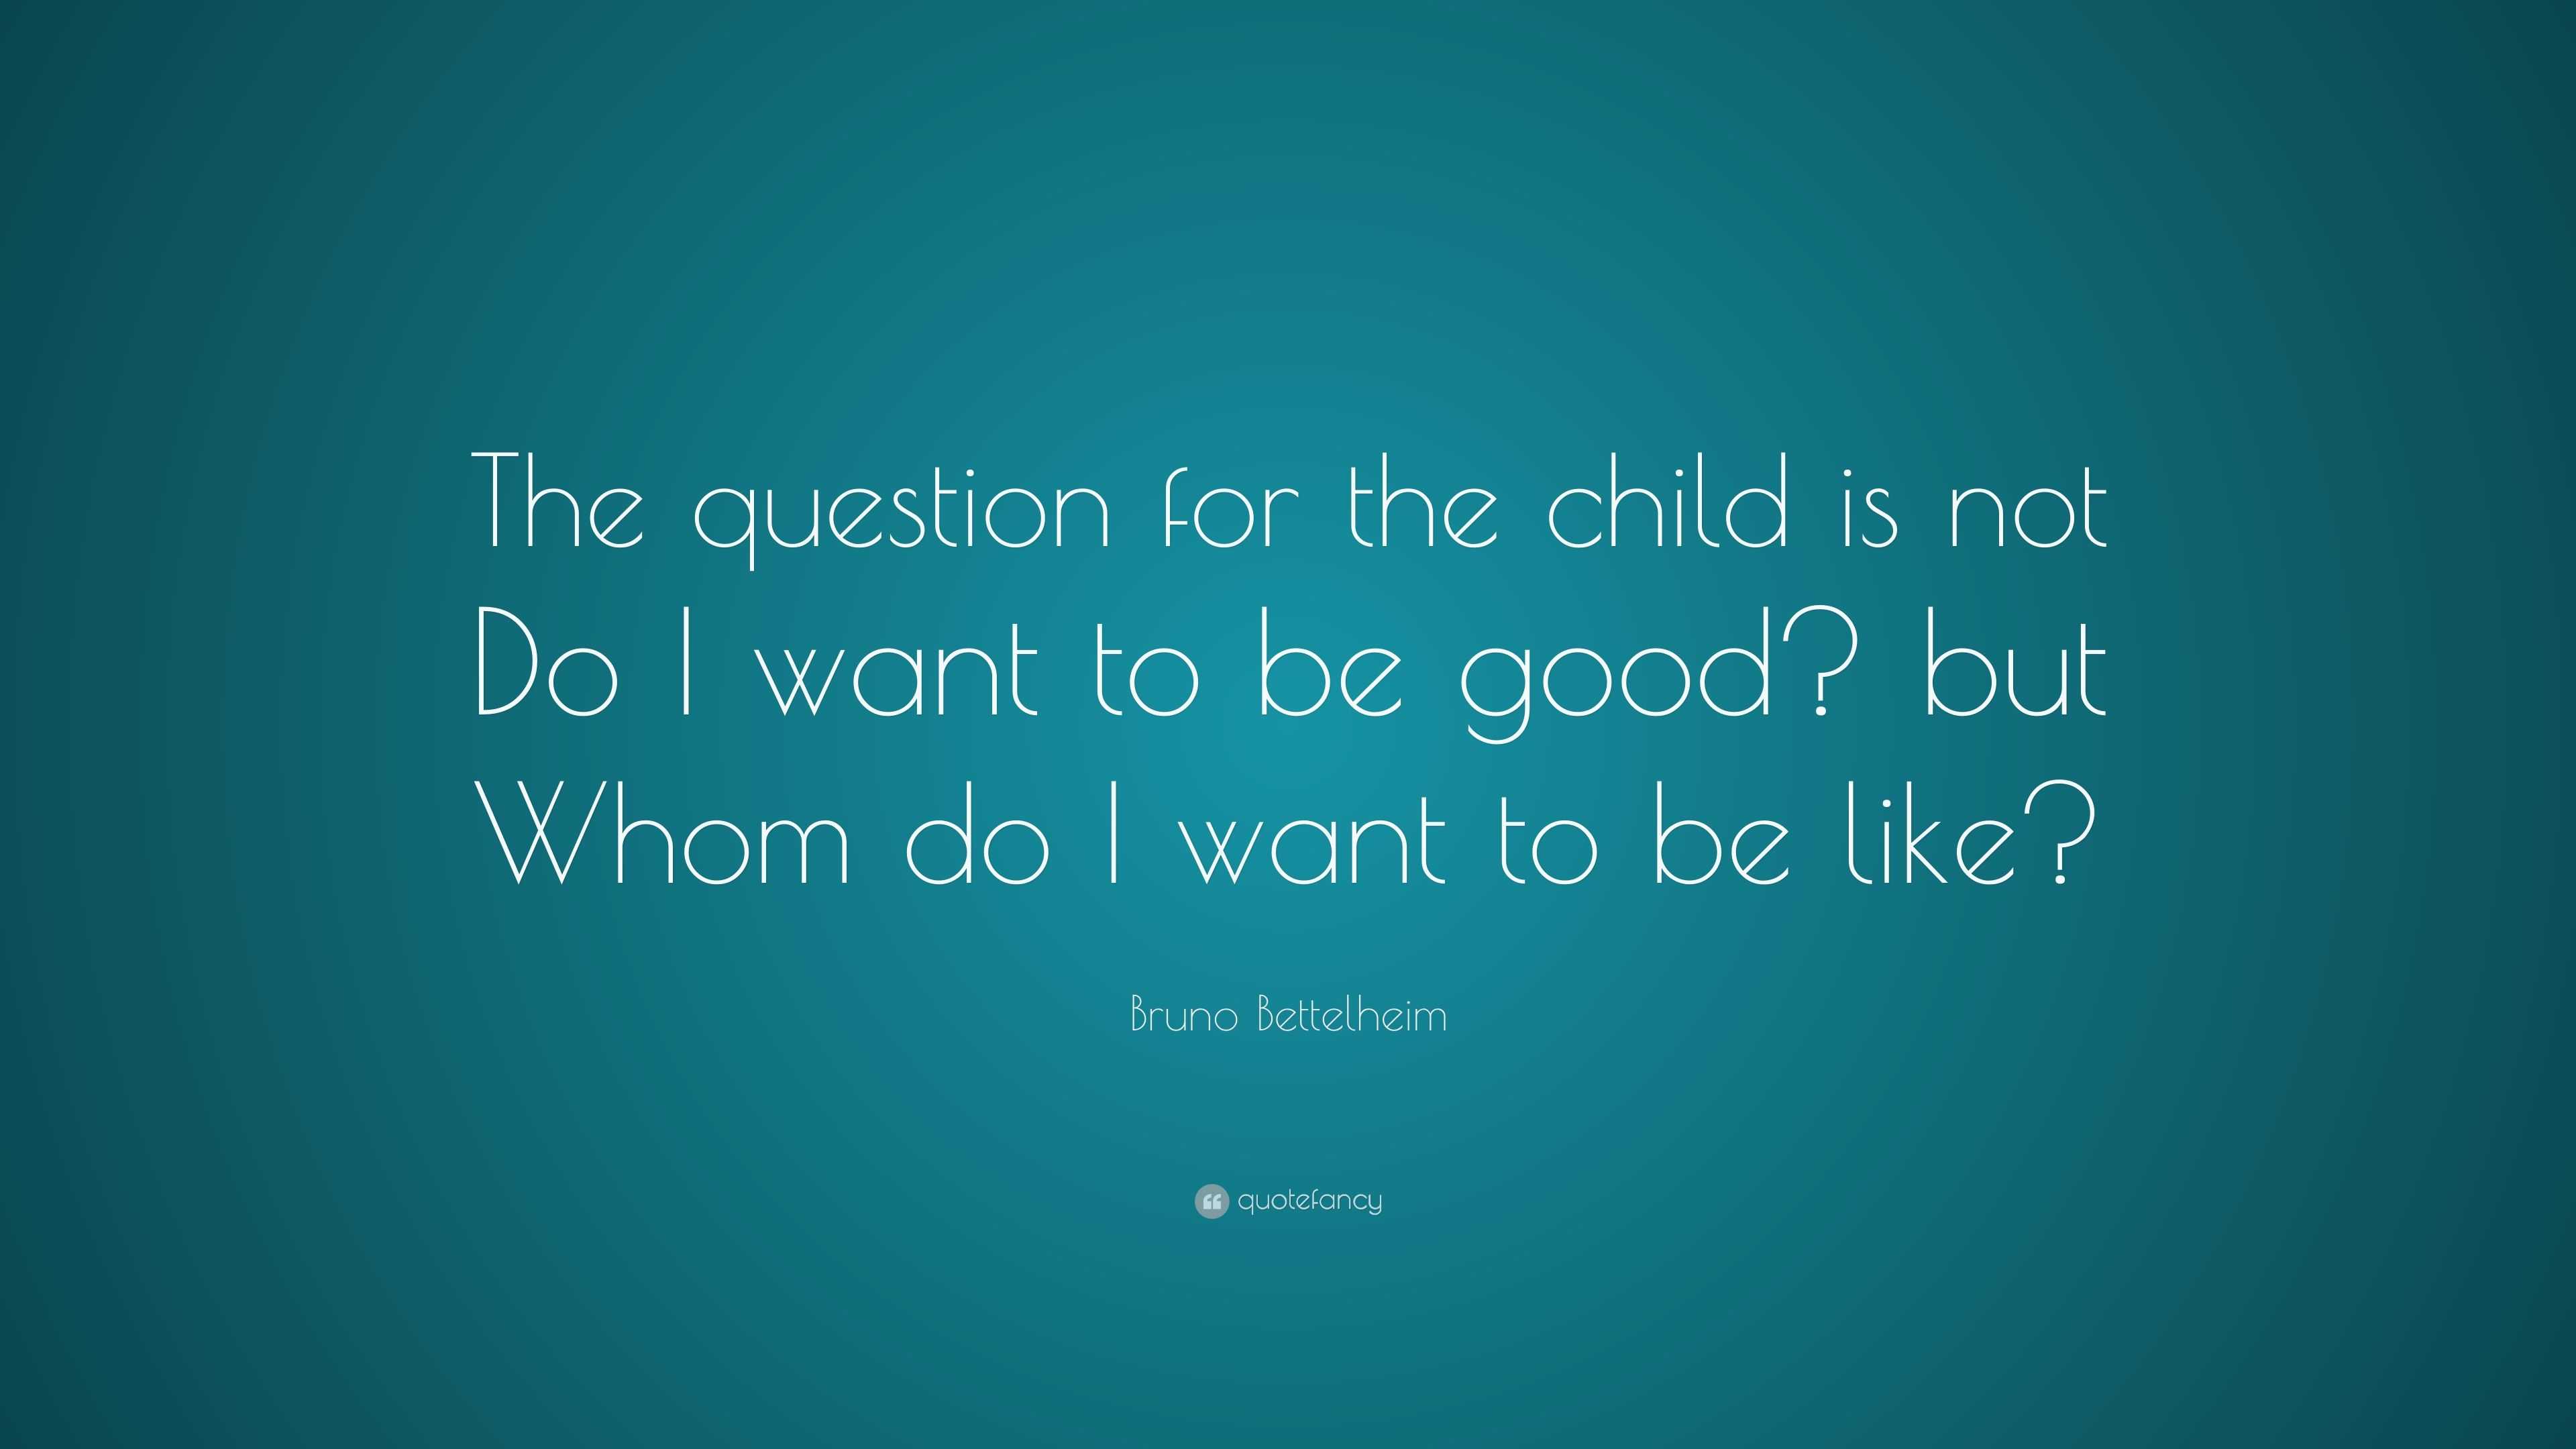 Bruno Bettelheim Quote: “The question for the child is not Do I want to ...